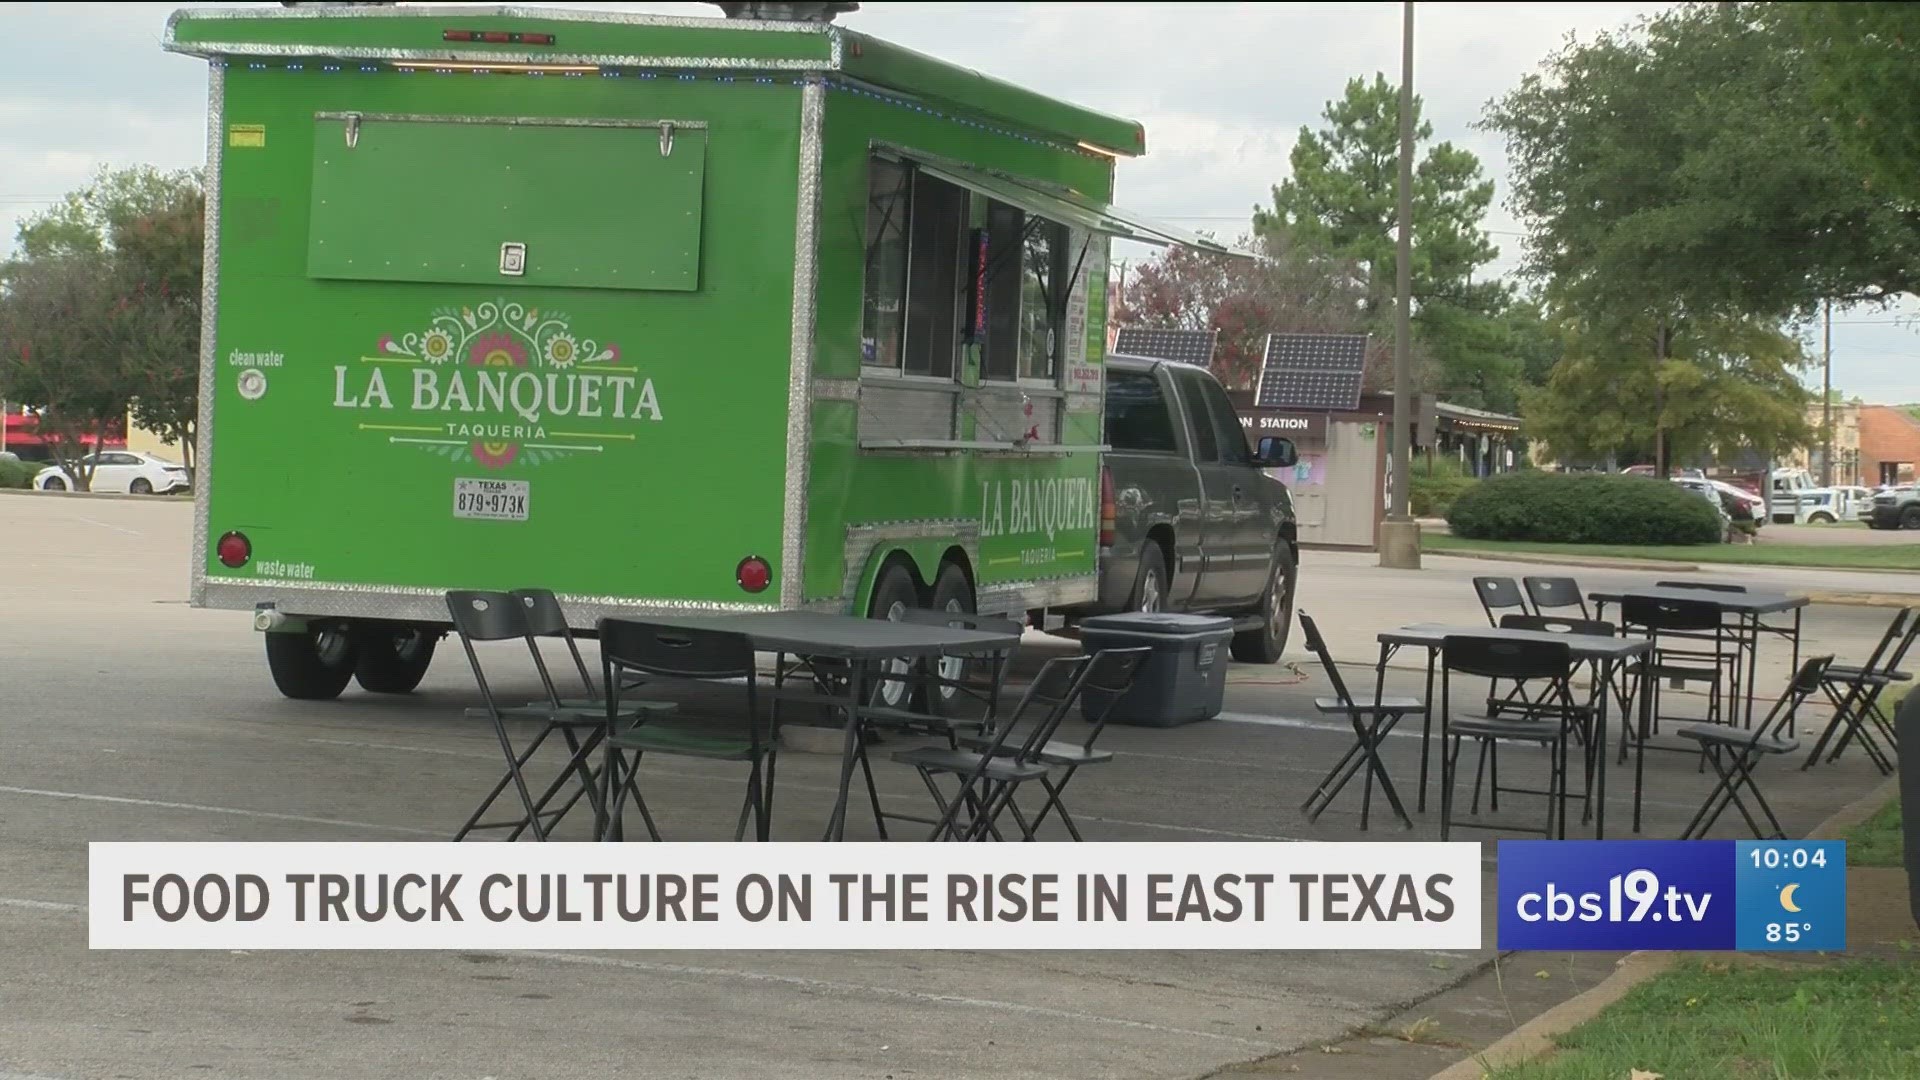 Since the spring season, NET Health has seen an increase of permits for food trucks.